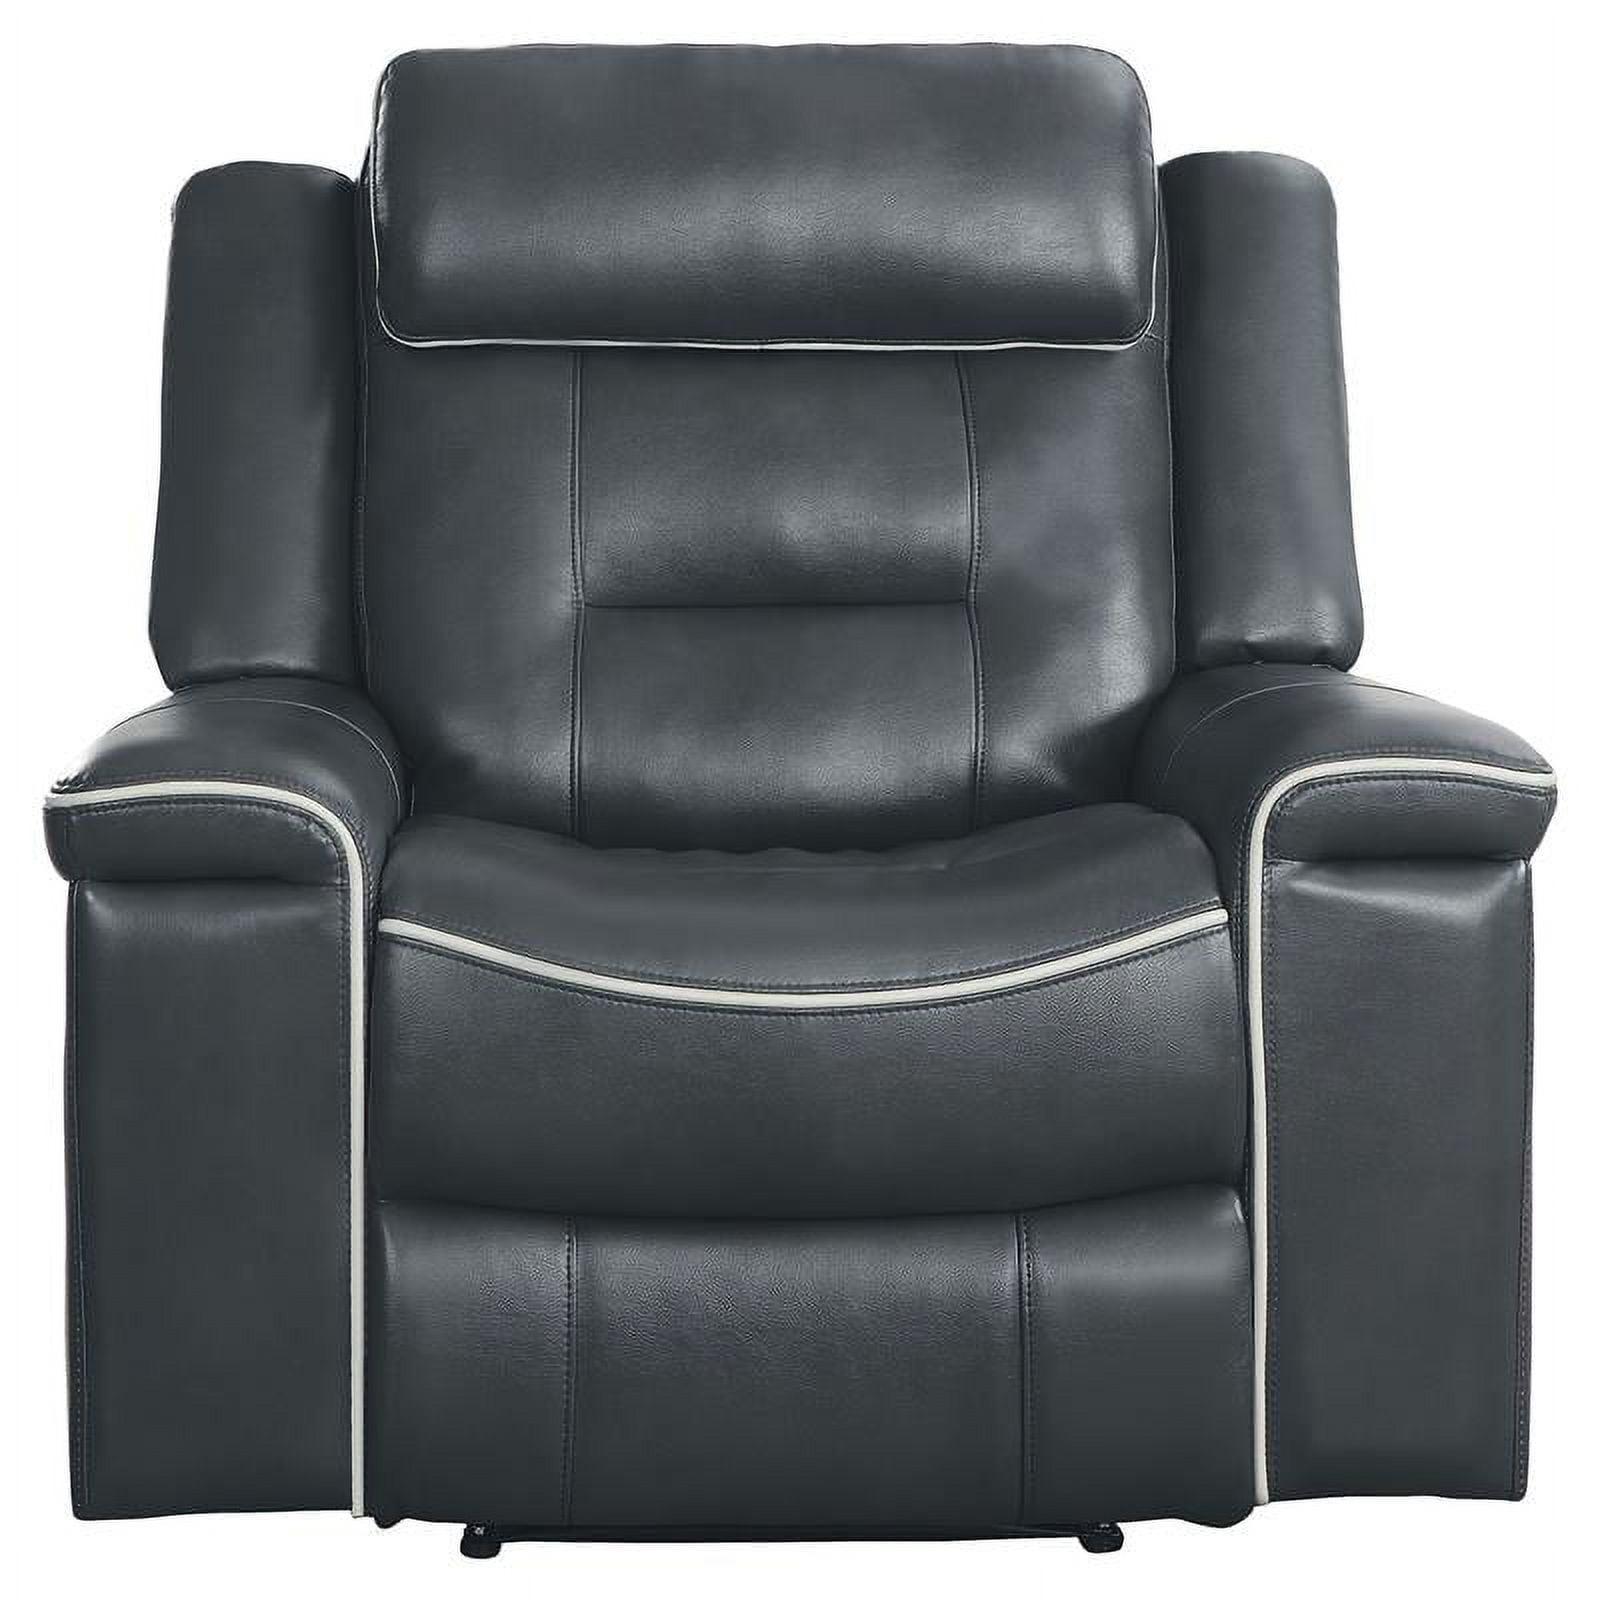 Contemporary Dark Gray Faux Leather Manual Recliner Chair